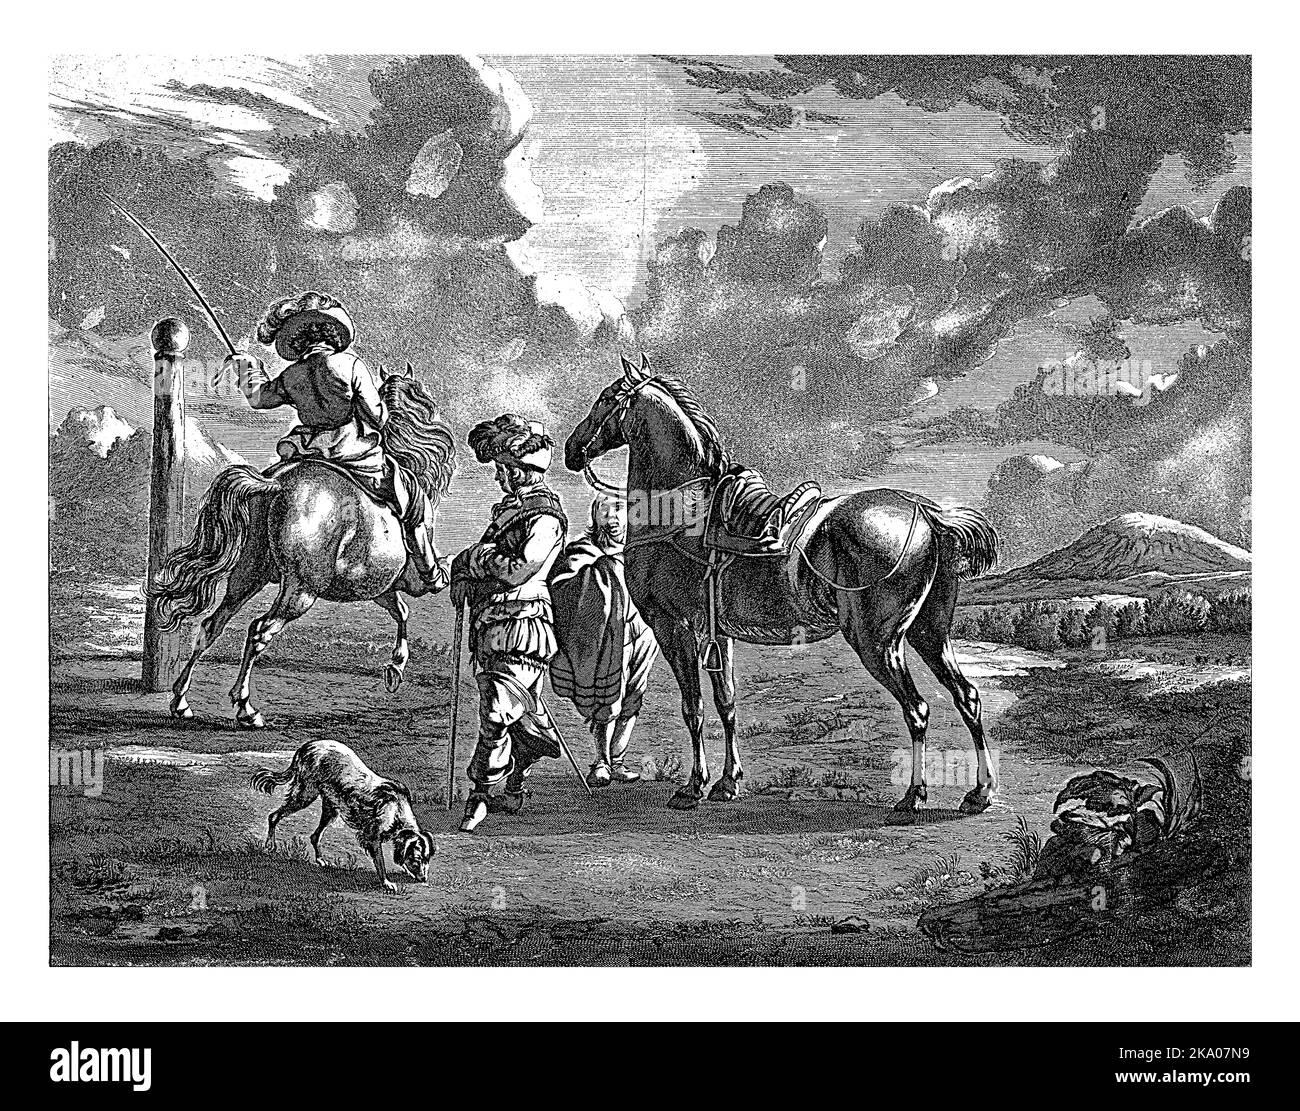 In a landscape, two men stand next to a saddled horse, watching a rider who rides his steed around a pole. Stock Photo